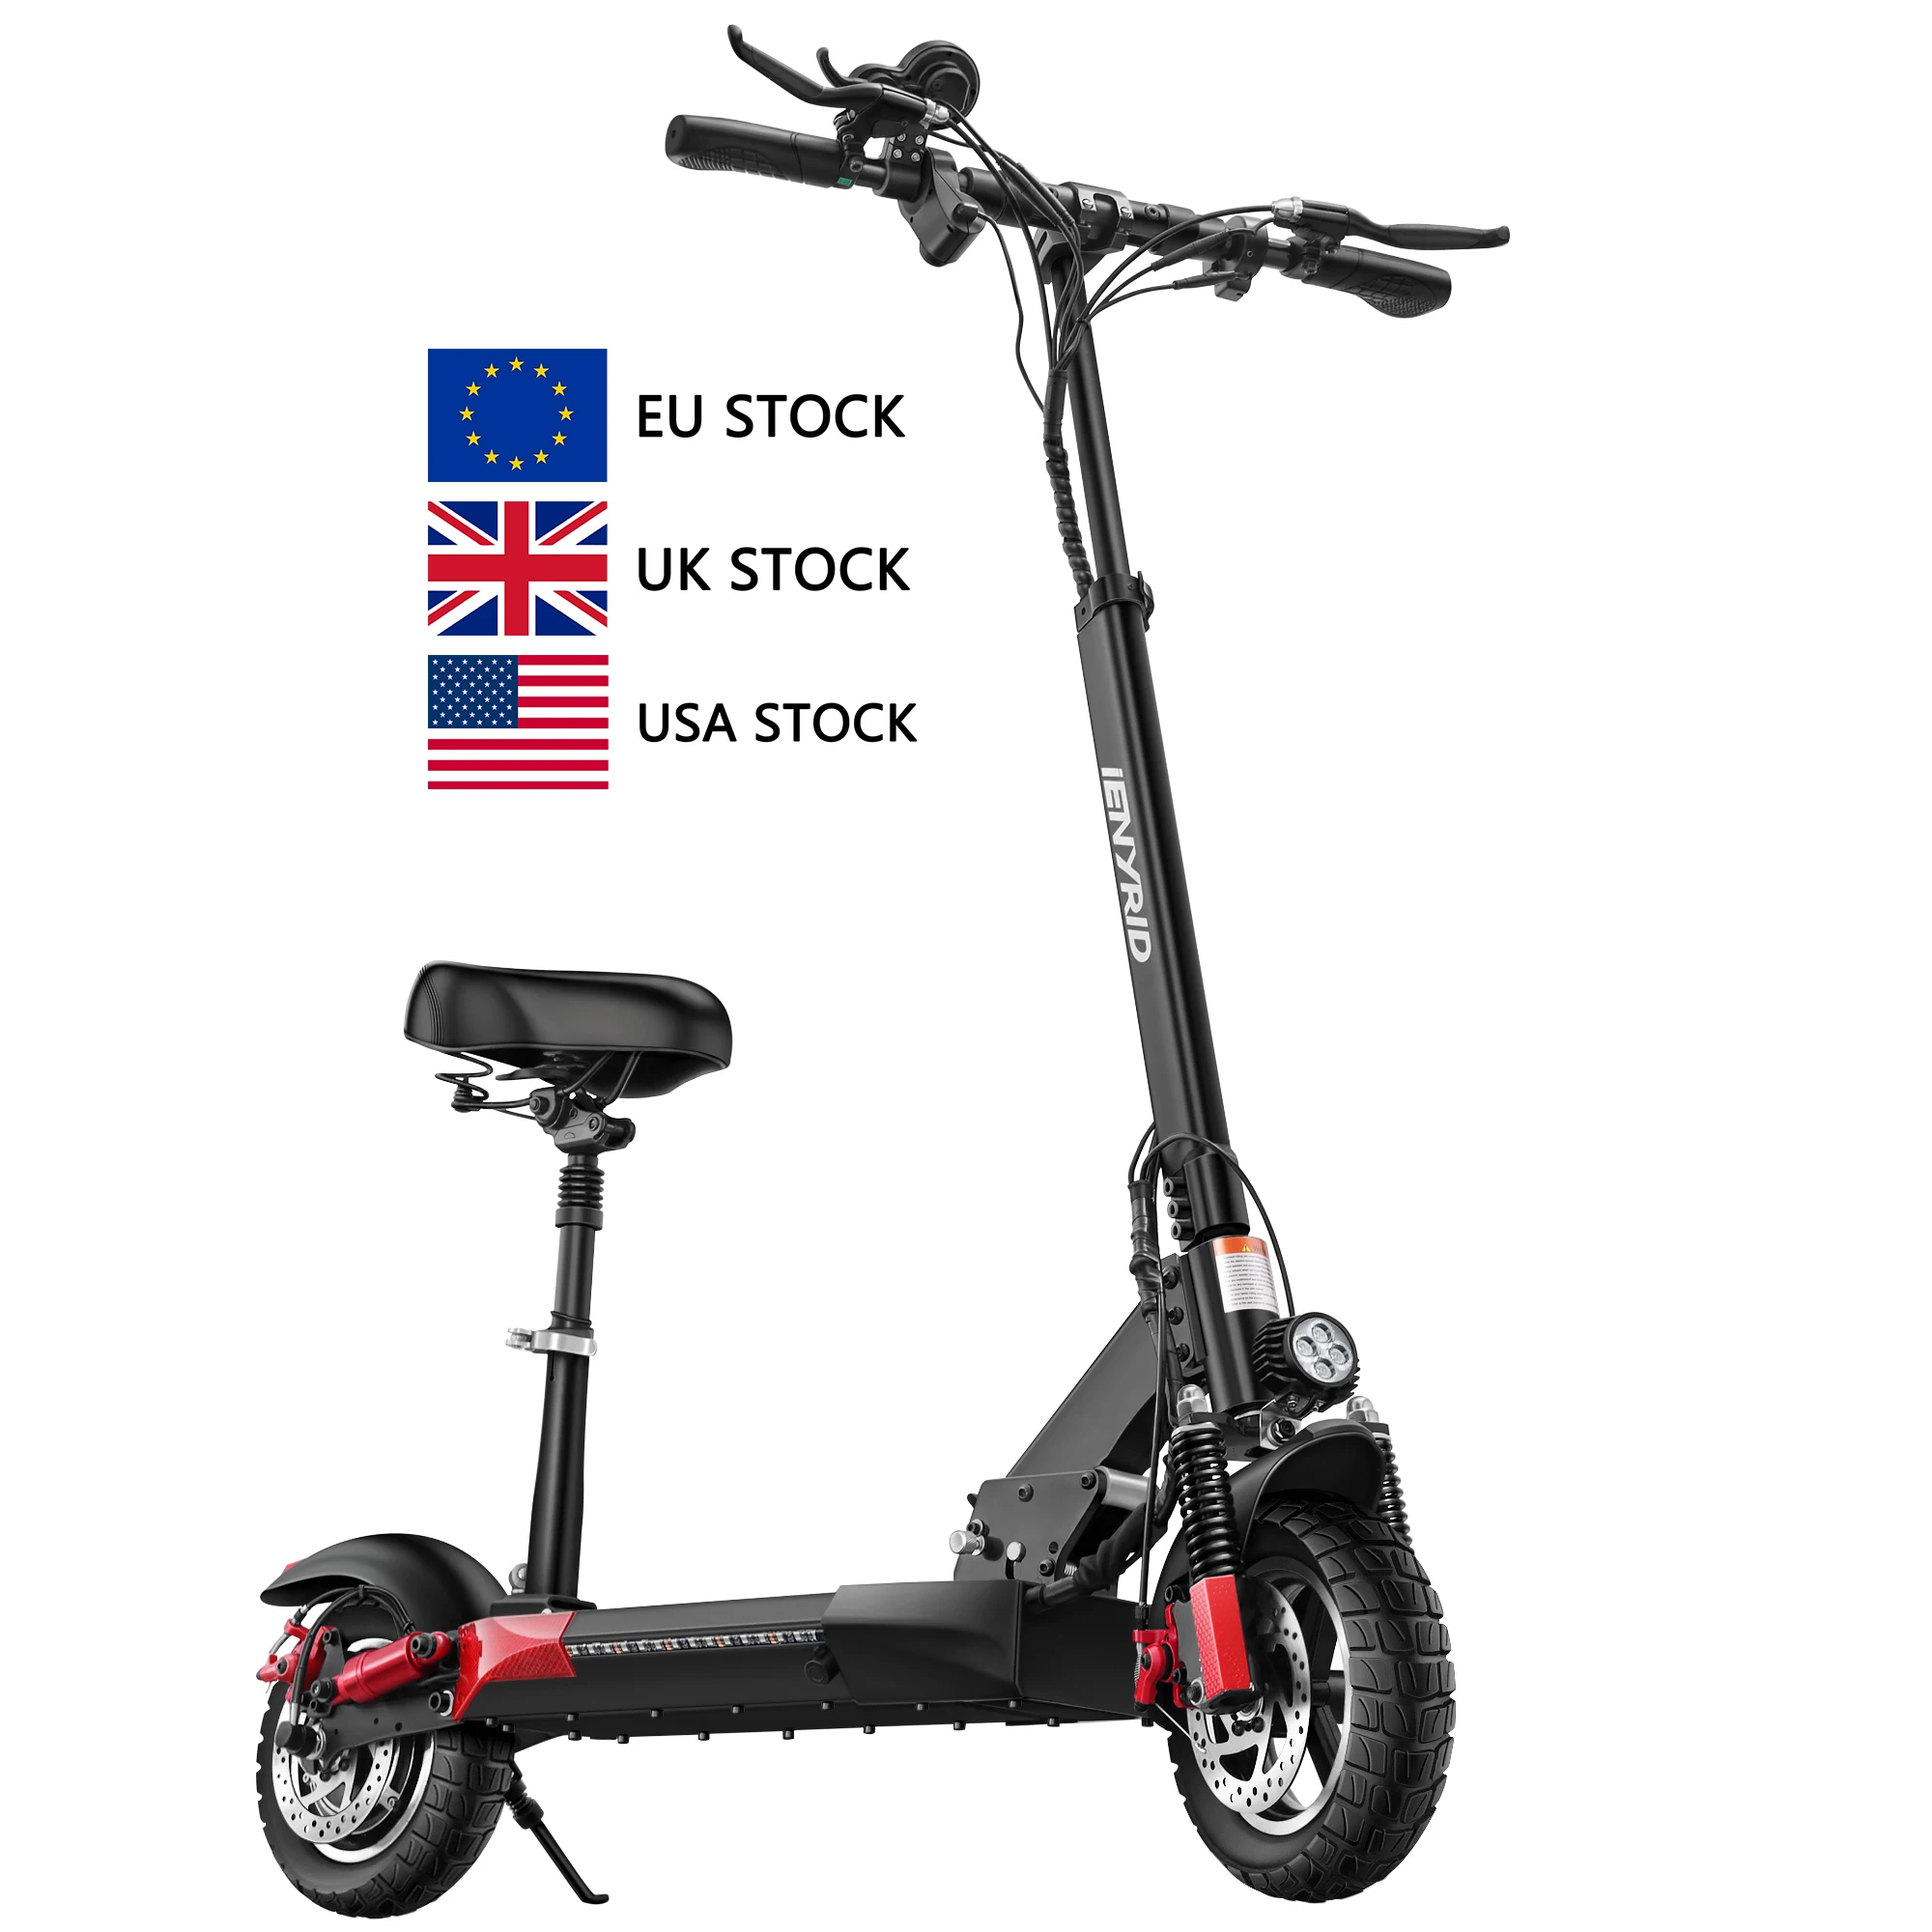 EU warehouse FCC ROHS CE iENYRID M4 PRO PRO 16ah Folding Electric Scooter 10" Off-road Tires with Drop shipping